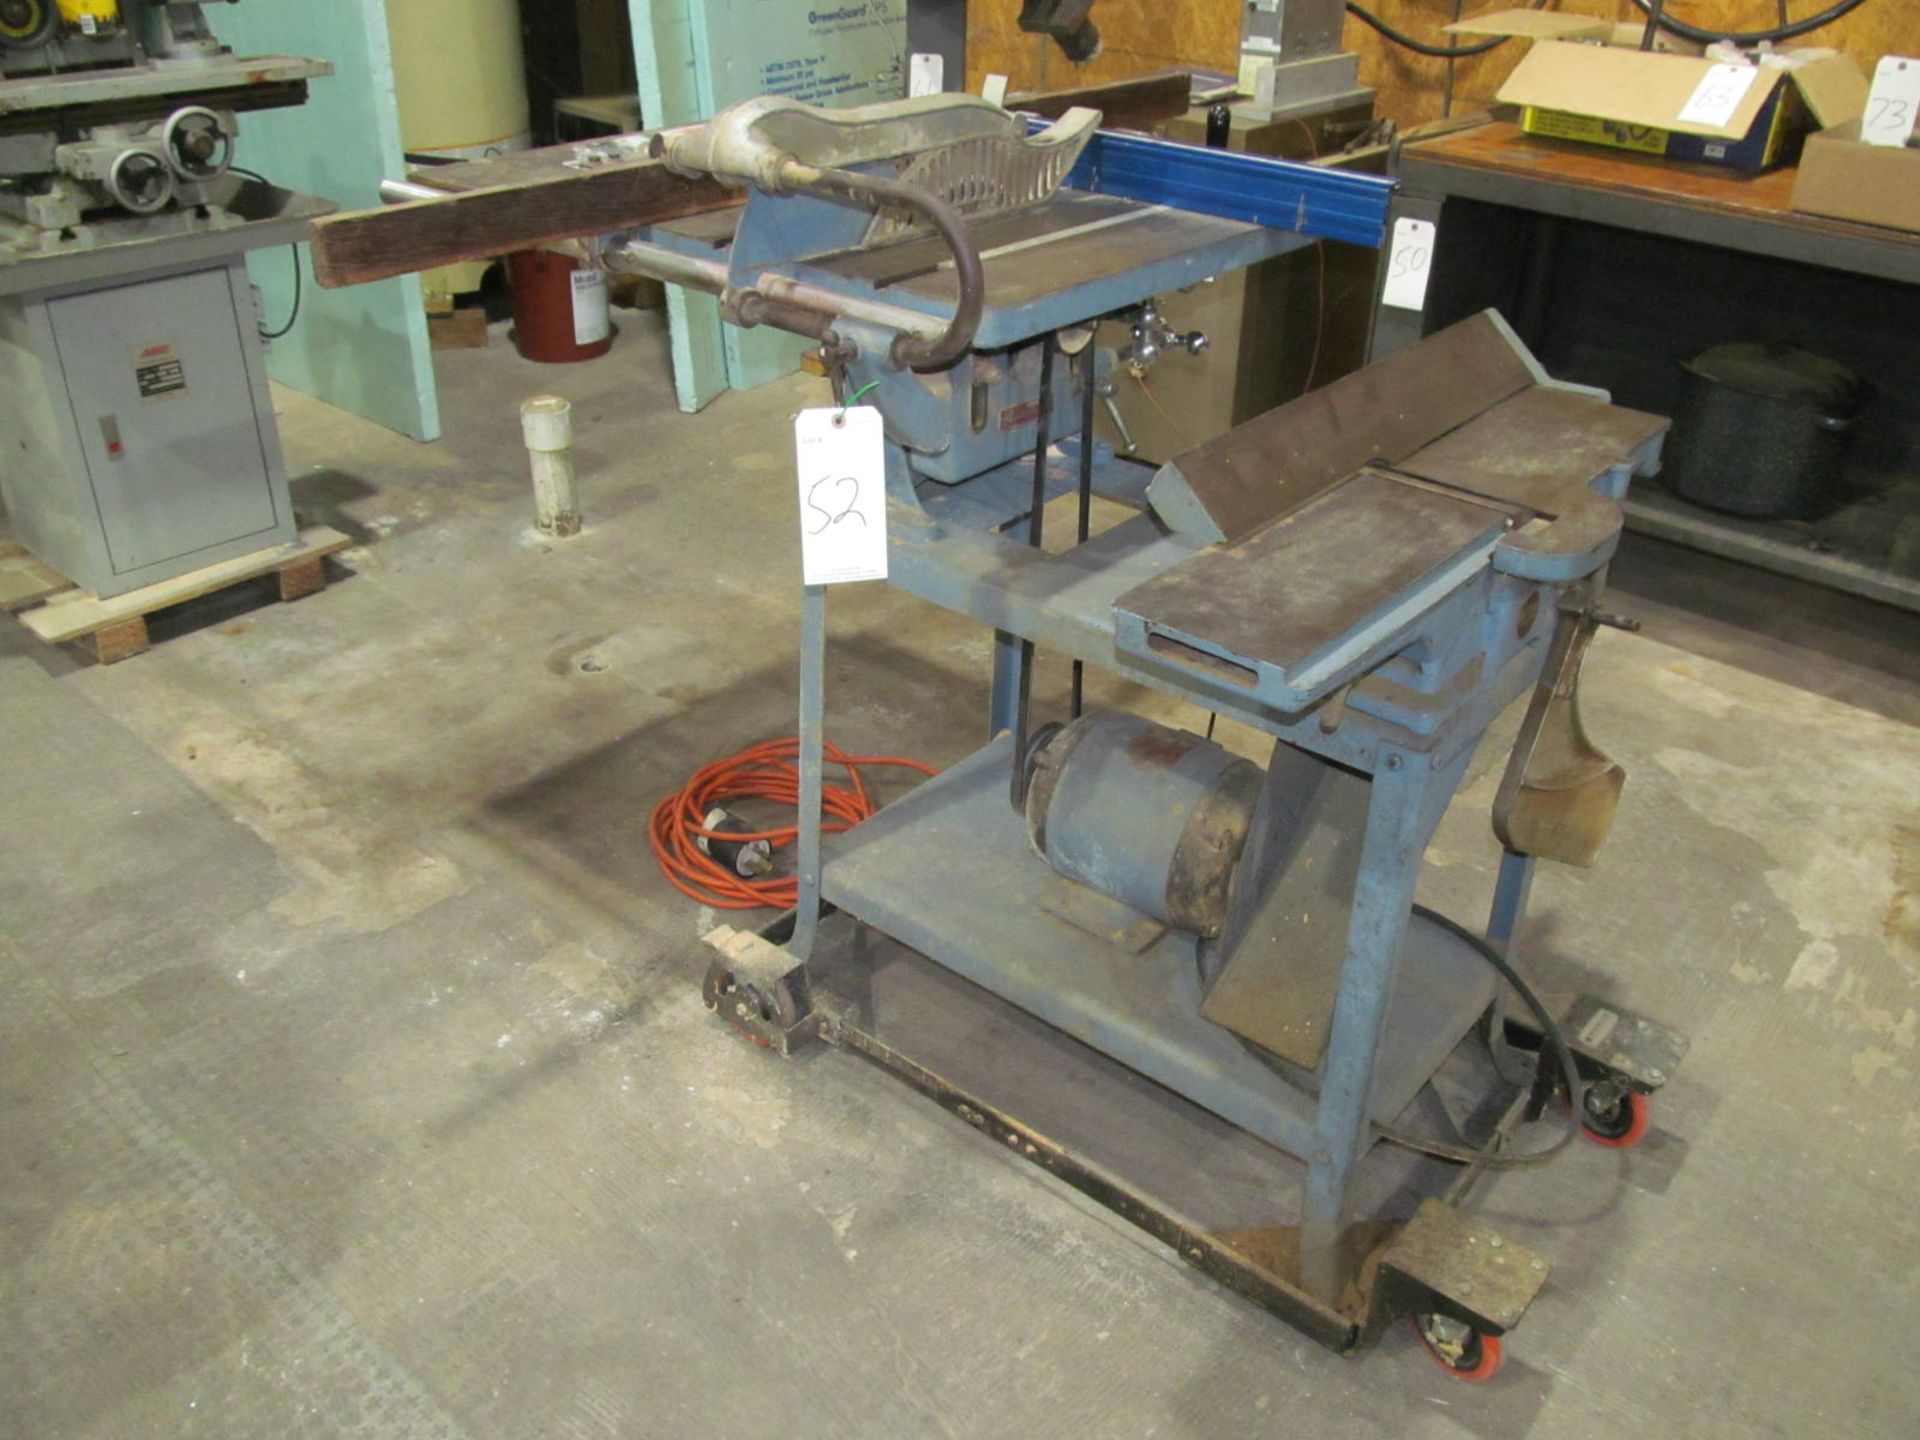 Delta-Rockwell 10" Table Saw-6" Jointer Combination